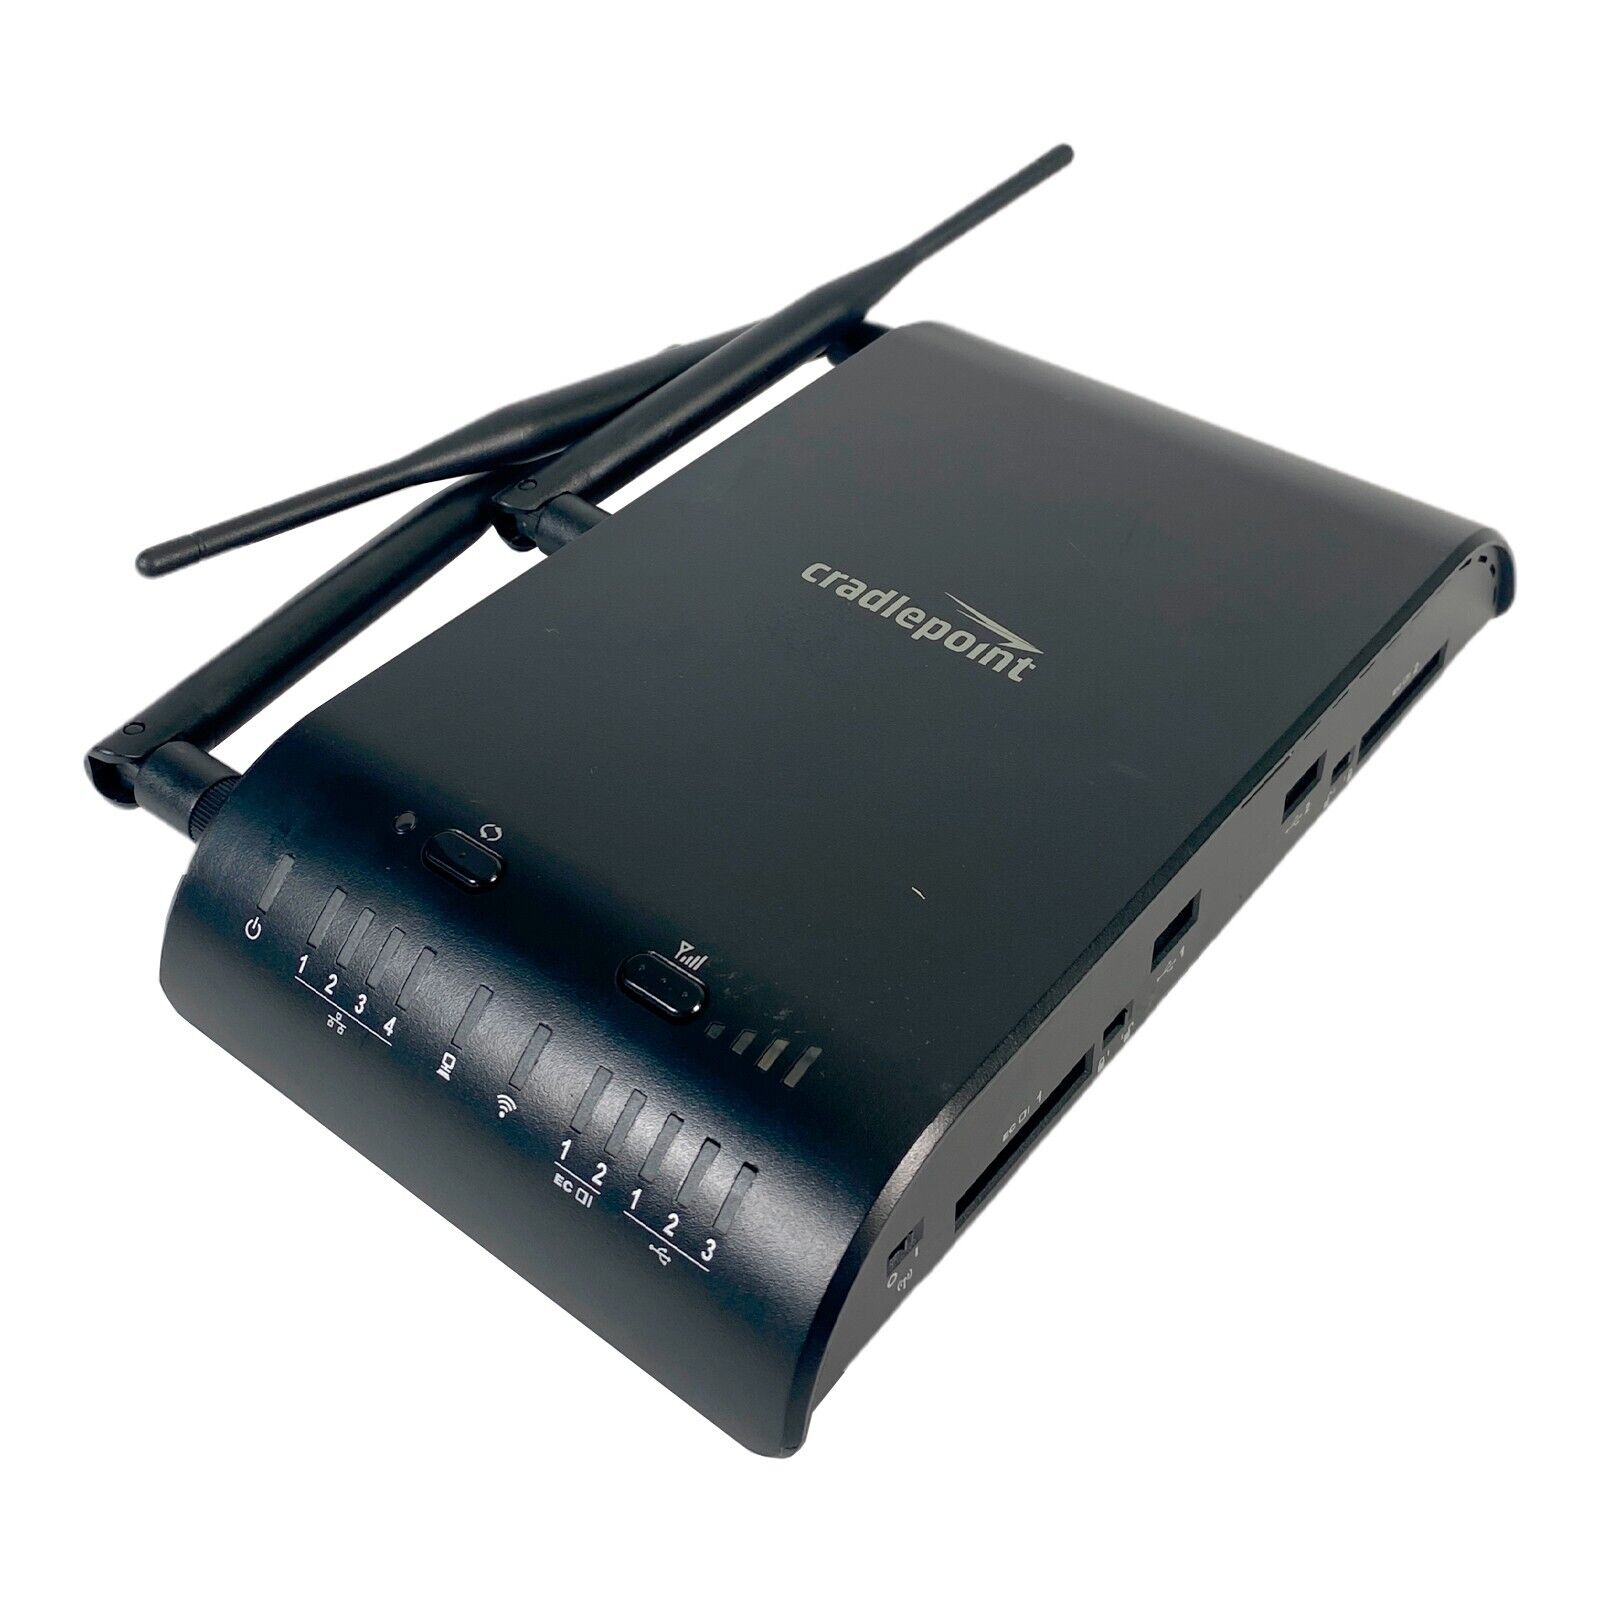 Cradlepoint MBR1400 V2 Wi-Fi Wireless Router MBR1400 No Adapter